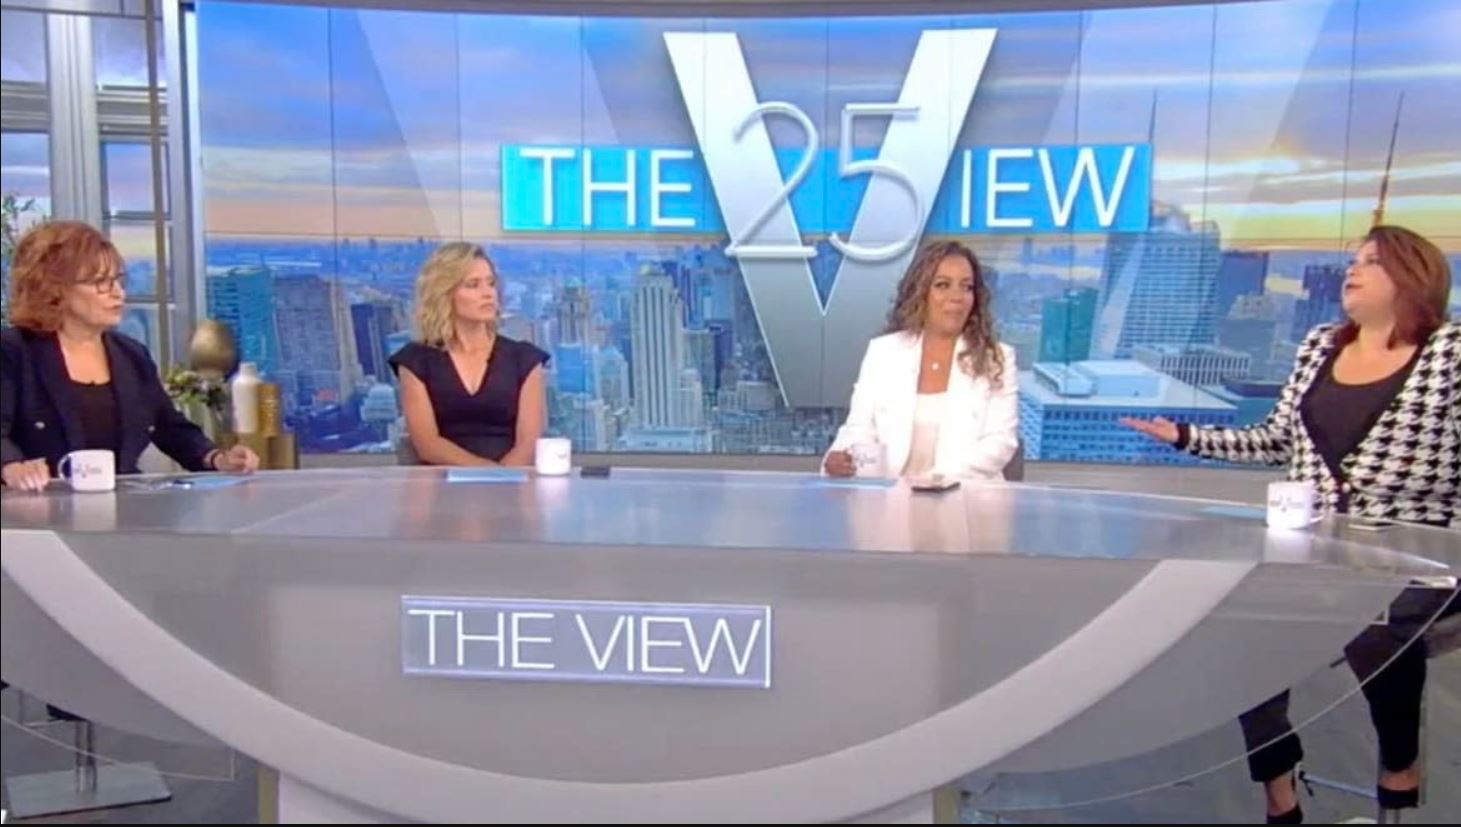 UPDATED: 2 'The View' Co-Hosts Test Positive for Covid During Show 2